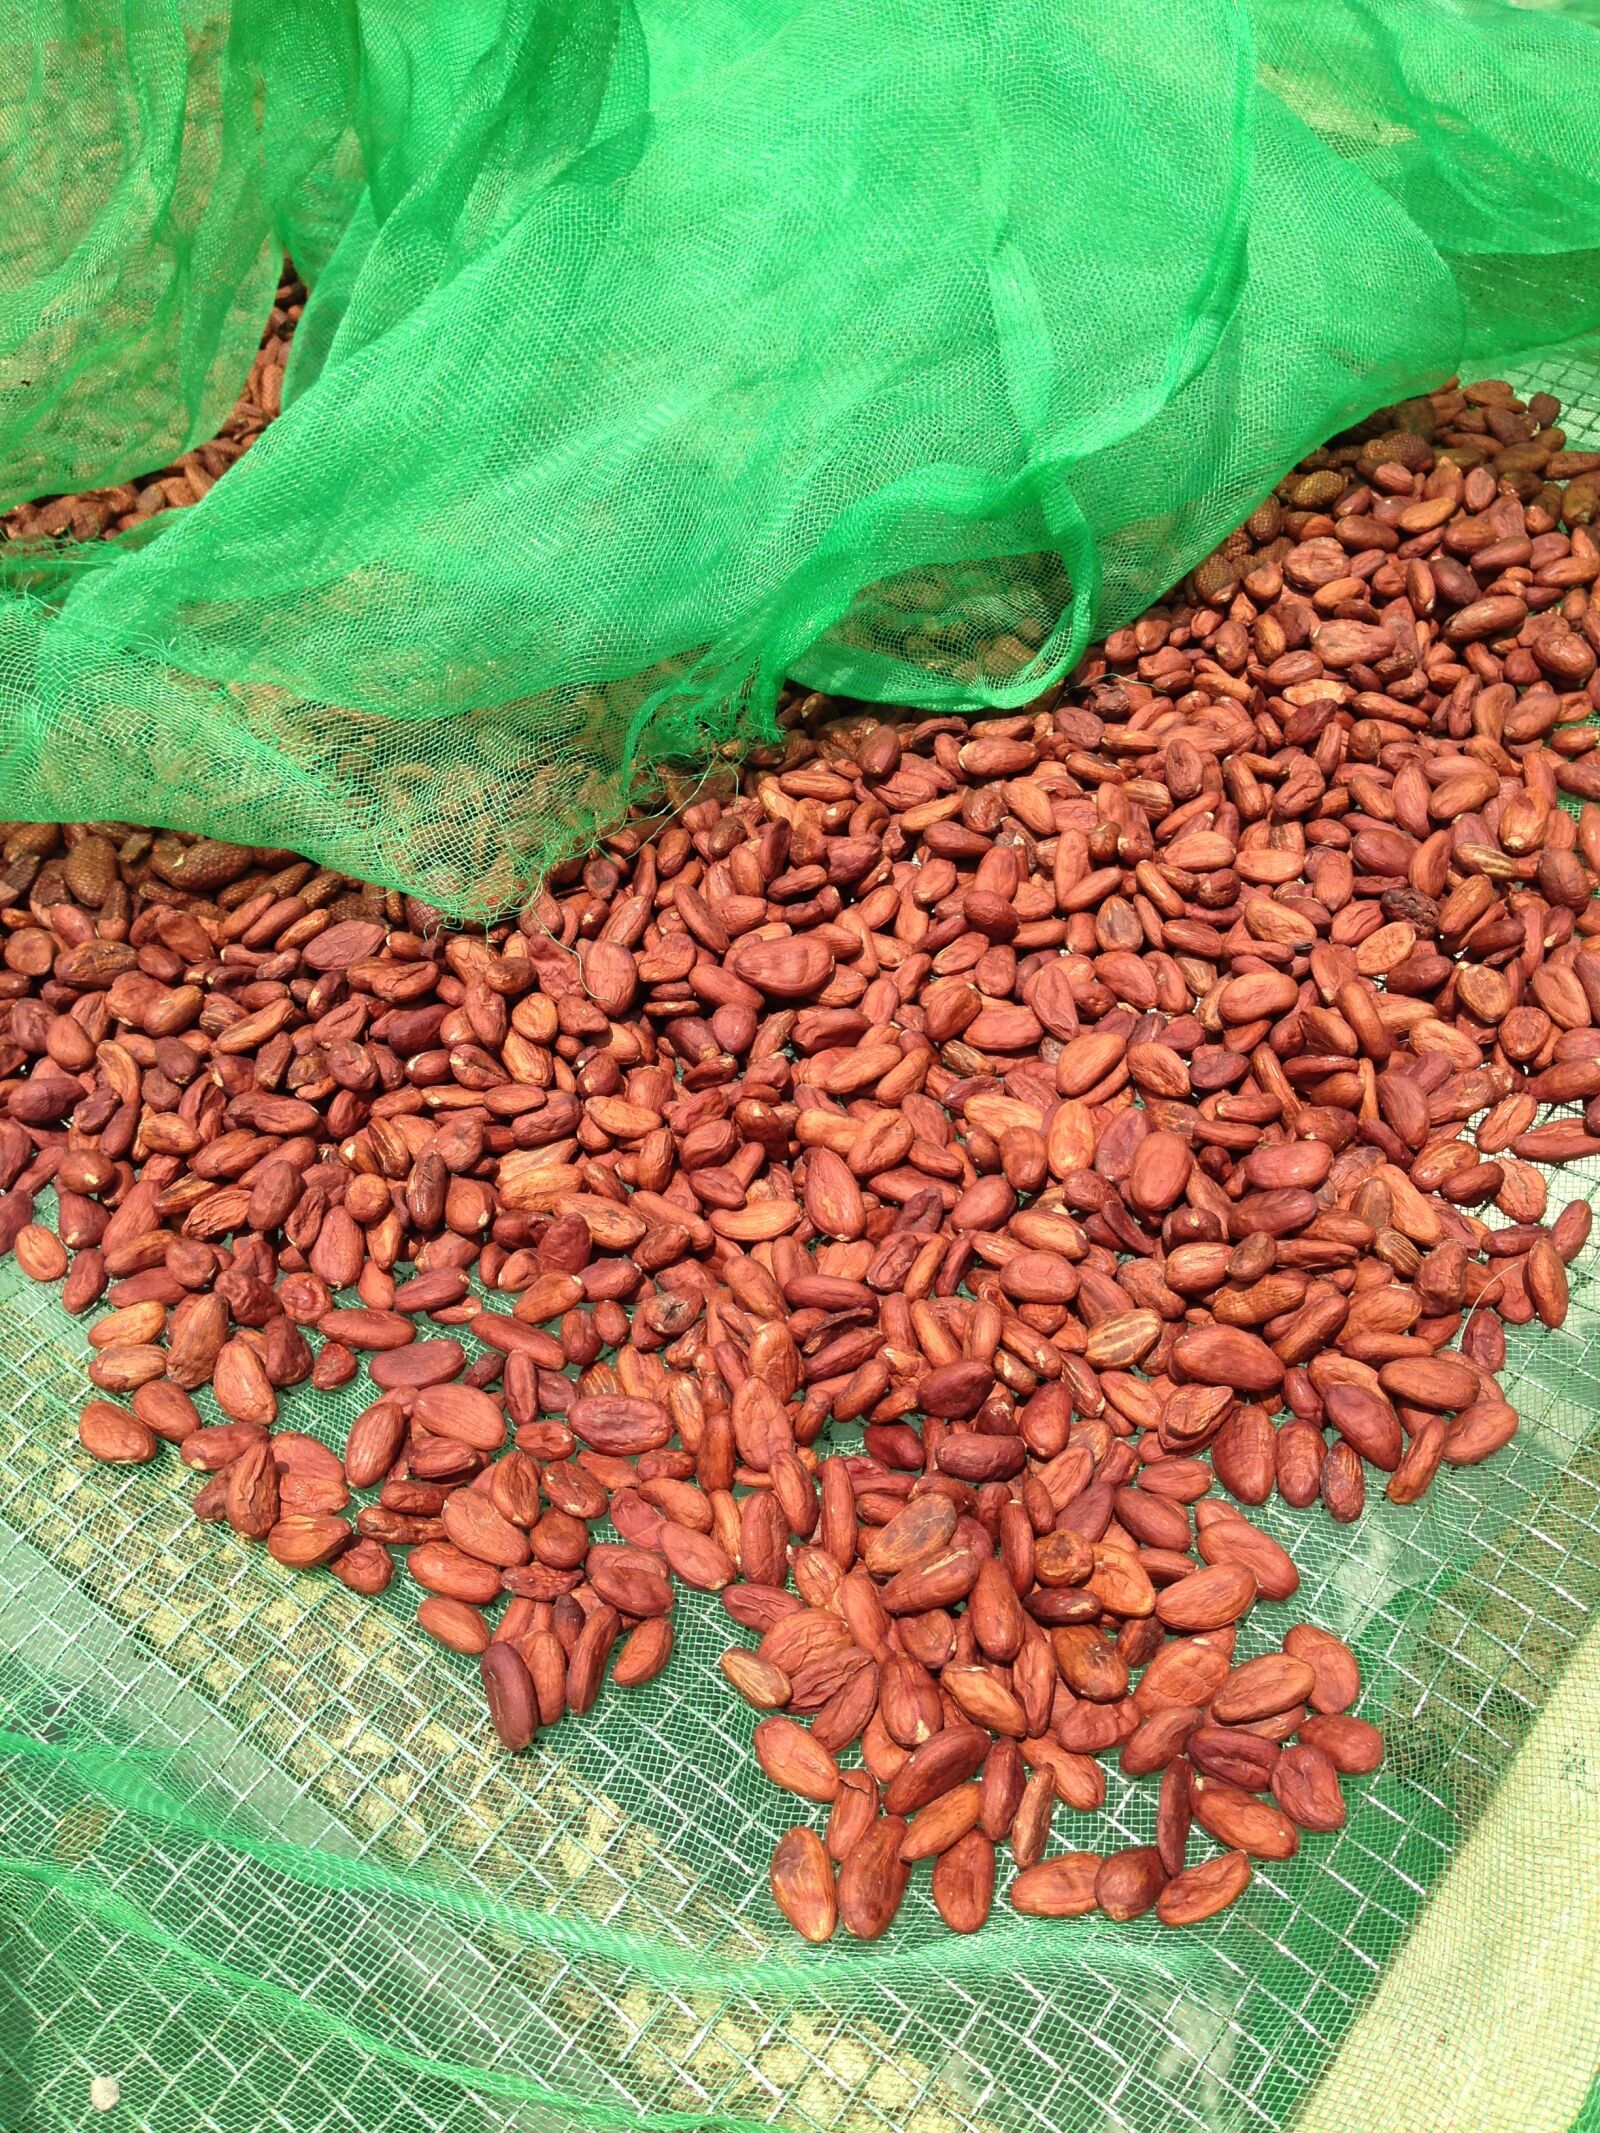 Apple iPhone 5c sample photo. Cocoa beans, chocolate, food photography